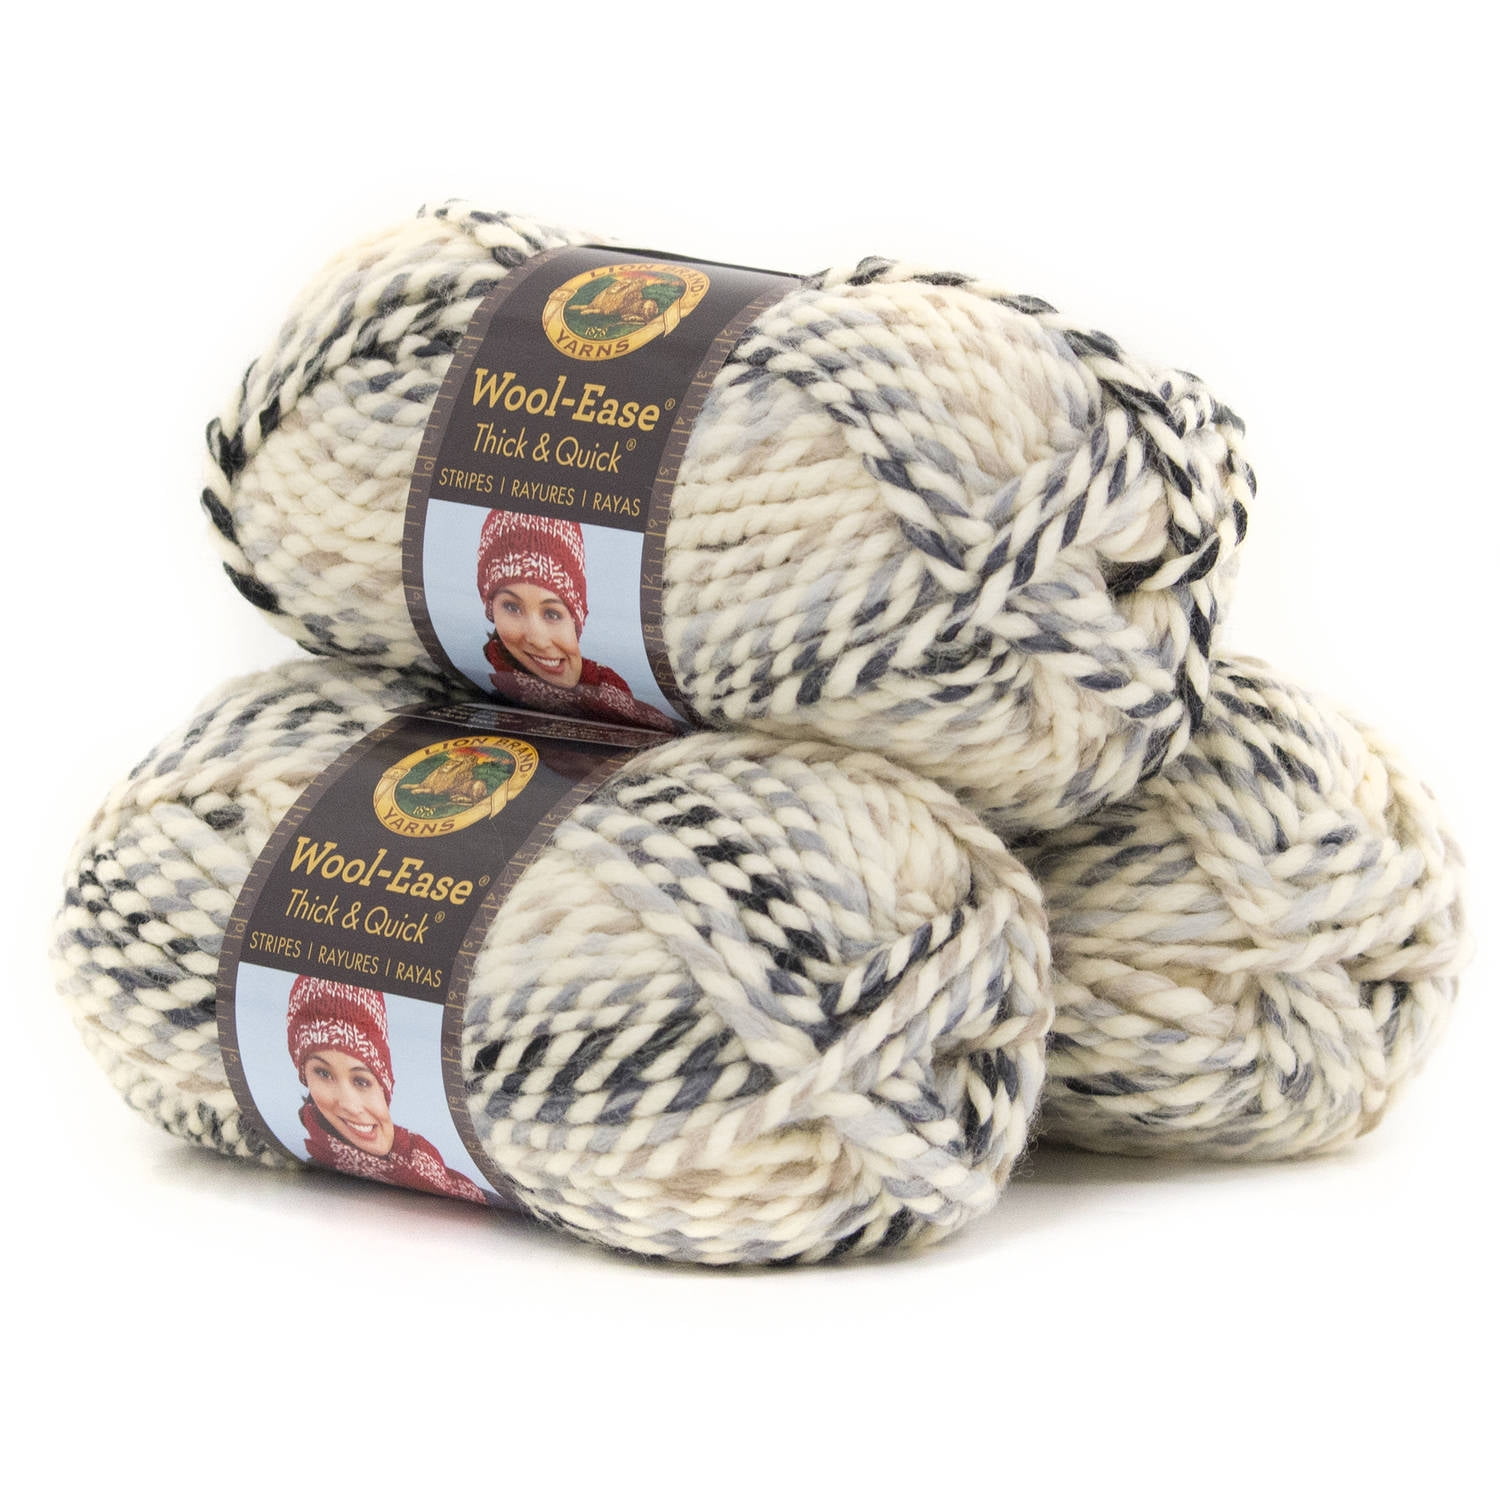 Lion Brand Wool-Ease Thick & Quick Yarn-Arctic Ice, 1 count - Kroger